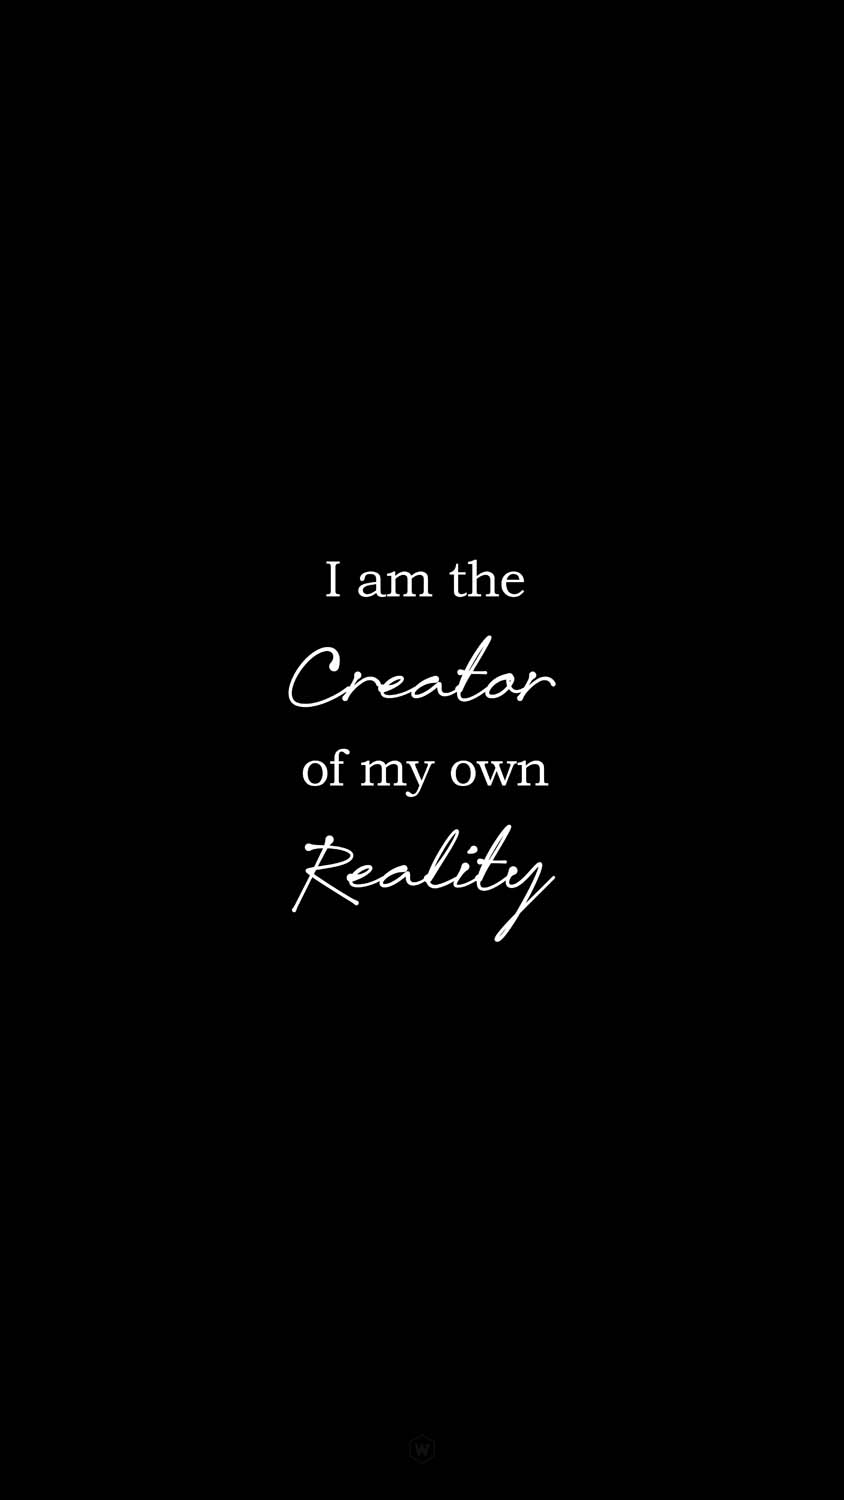 Creator Of My Own Reality IPhone Wallpaper HD - IPhone Wallpapers : iPhone  Wallpapers